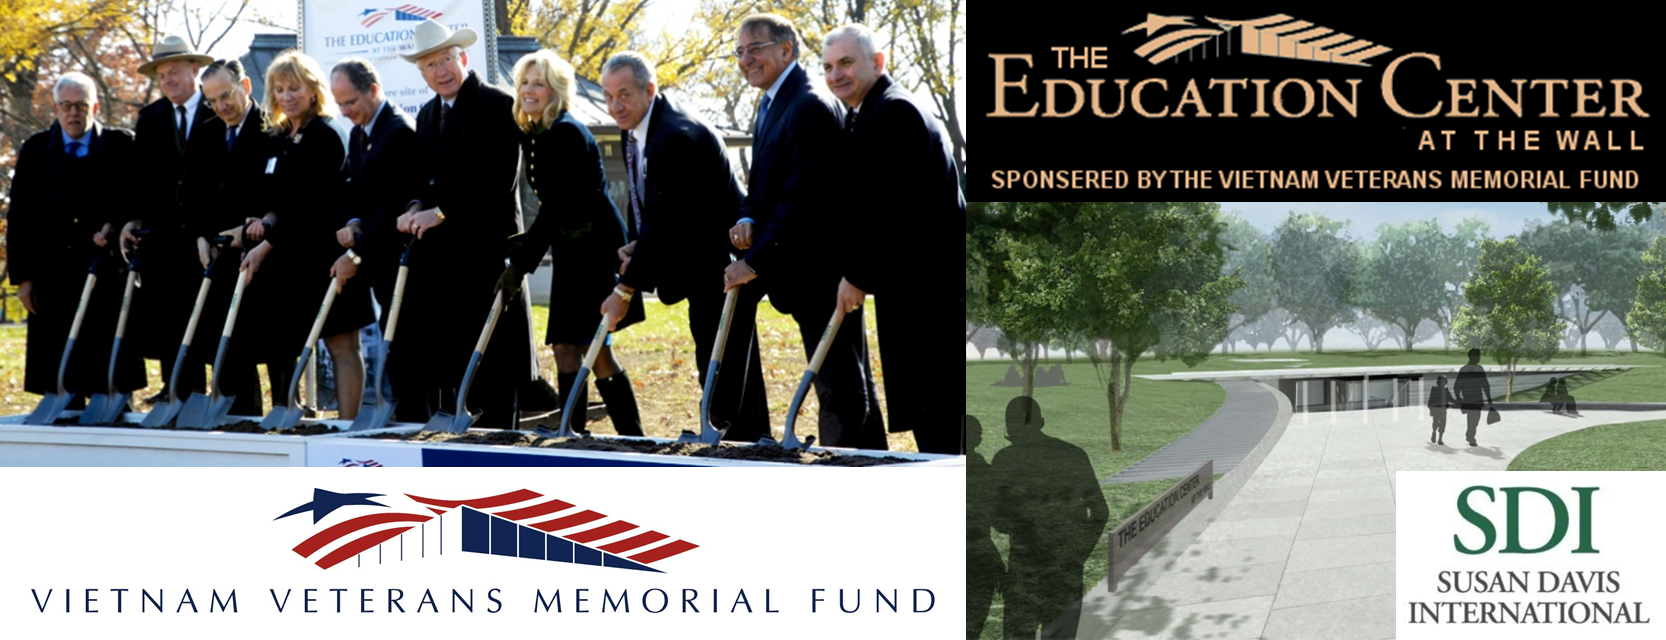  Ceremonial Groundbreaking for The Education Center at The Wall - Logo - https://s41078.pcdn.co/wp-content/uploads/2018/11/sdi-vvmf-ed.png